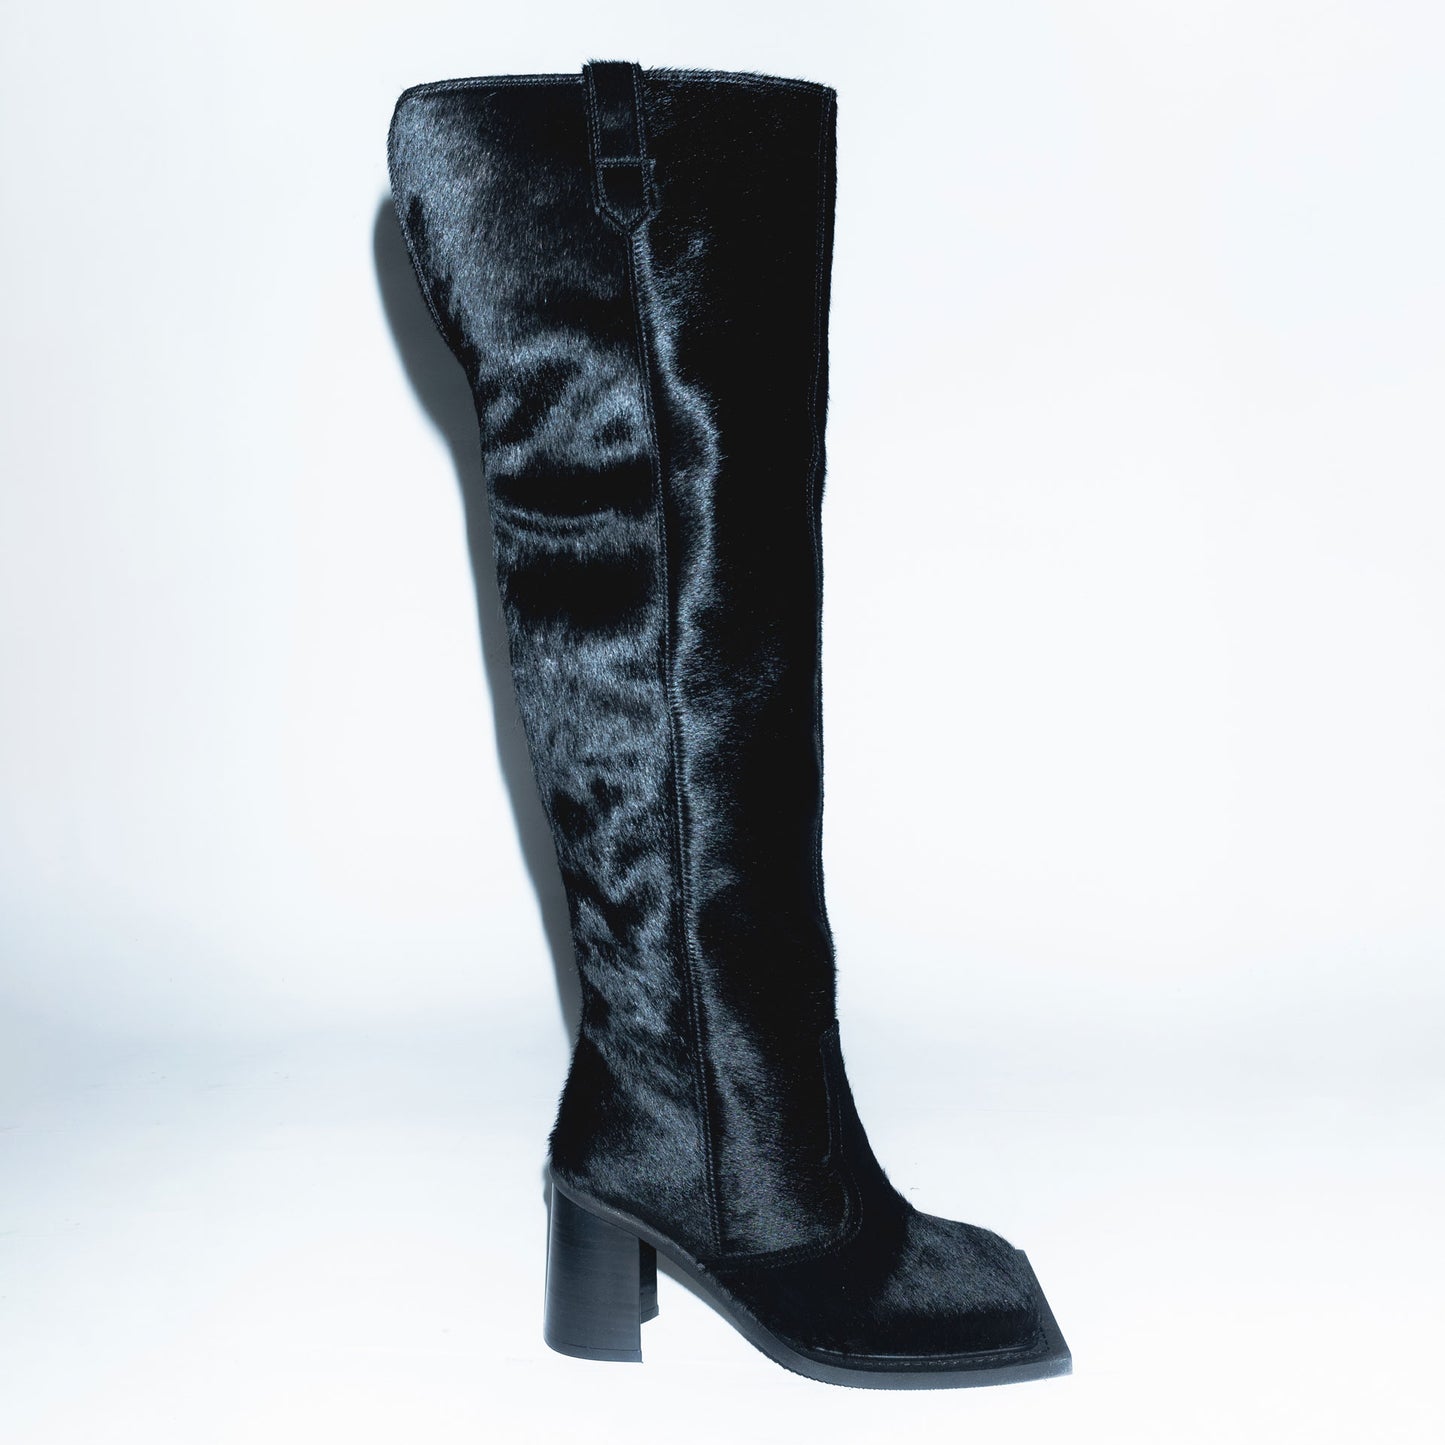 Runway Howling Knee High Boots in Cow Hair Black